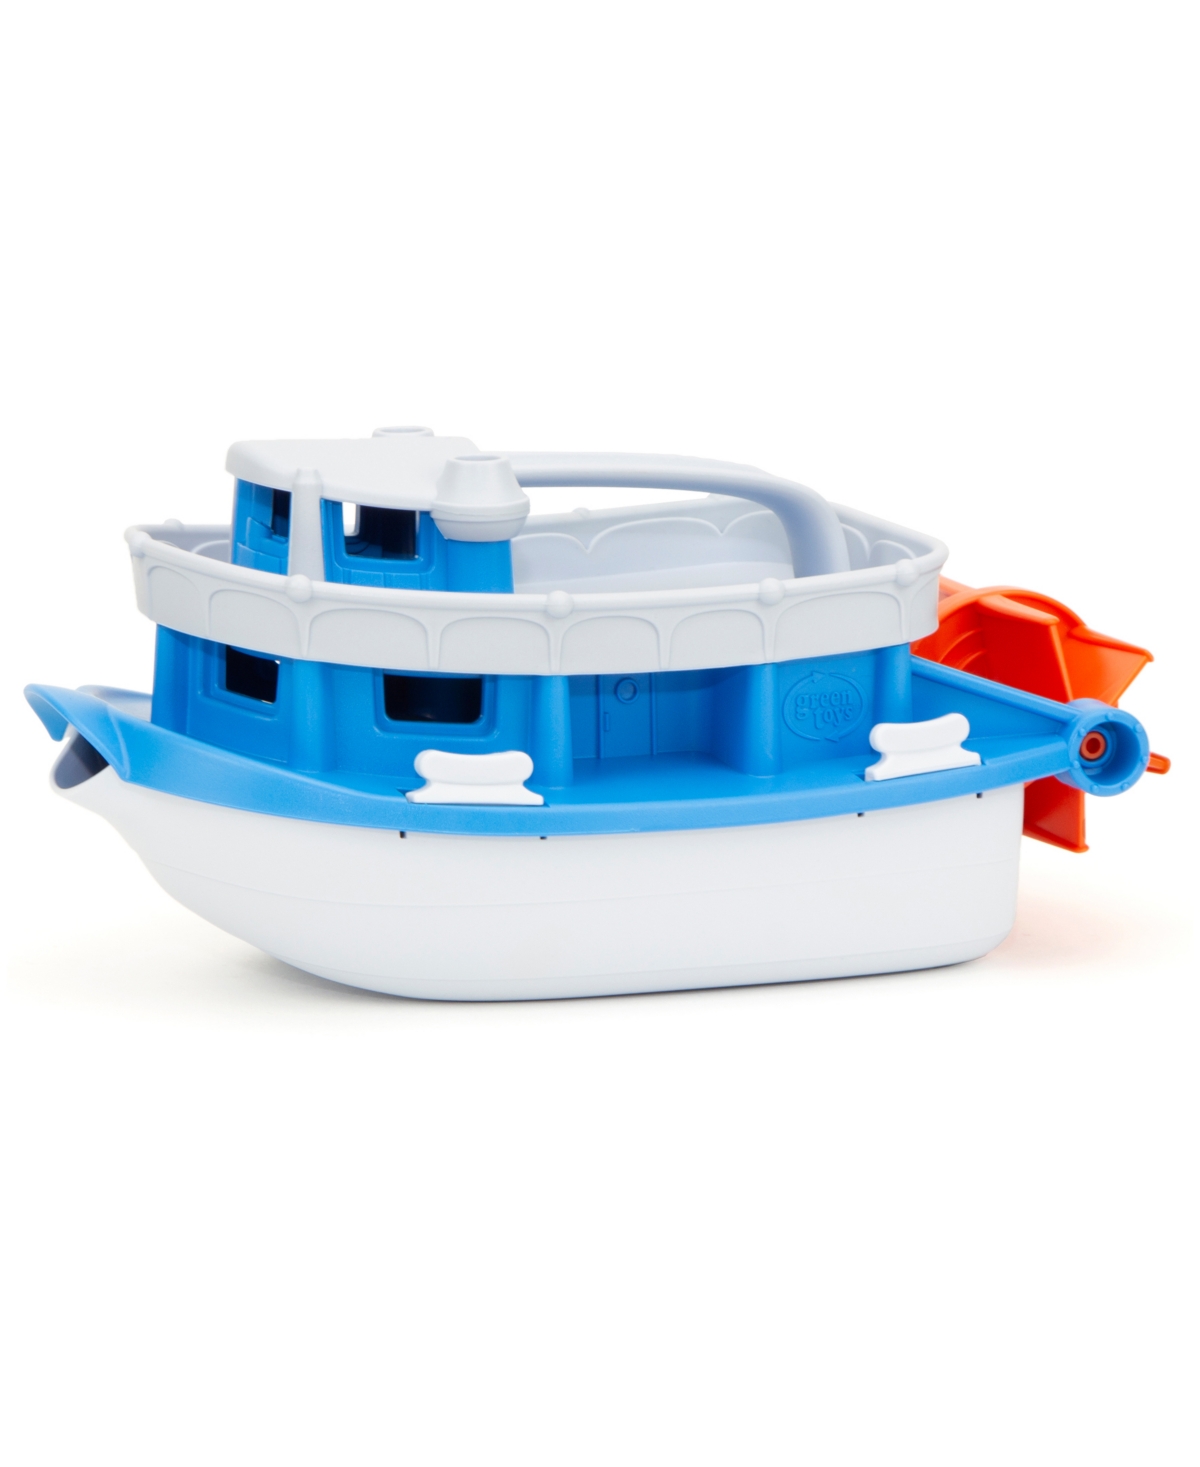 Areyougame Green Toys Paddle Boat In No Color